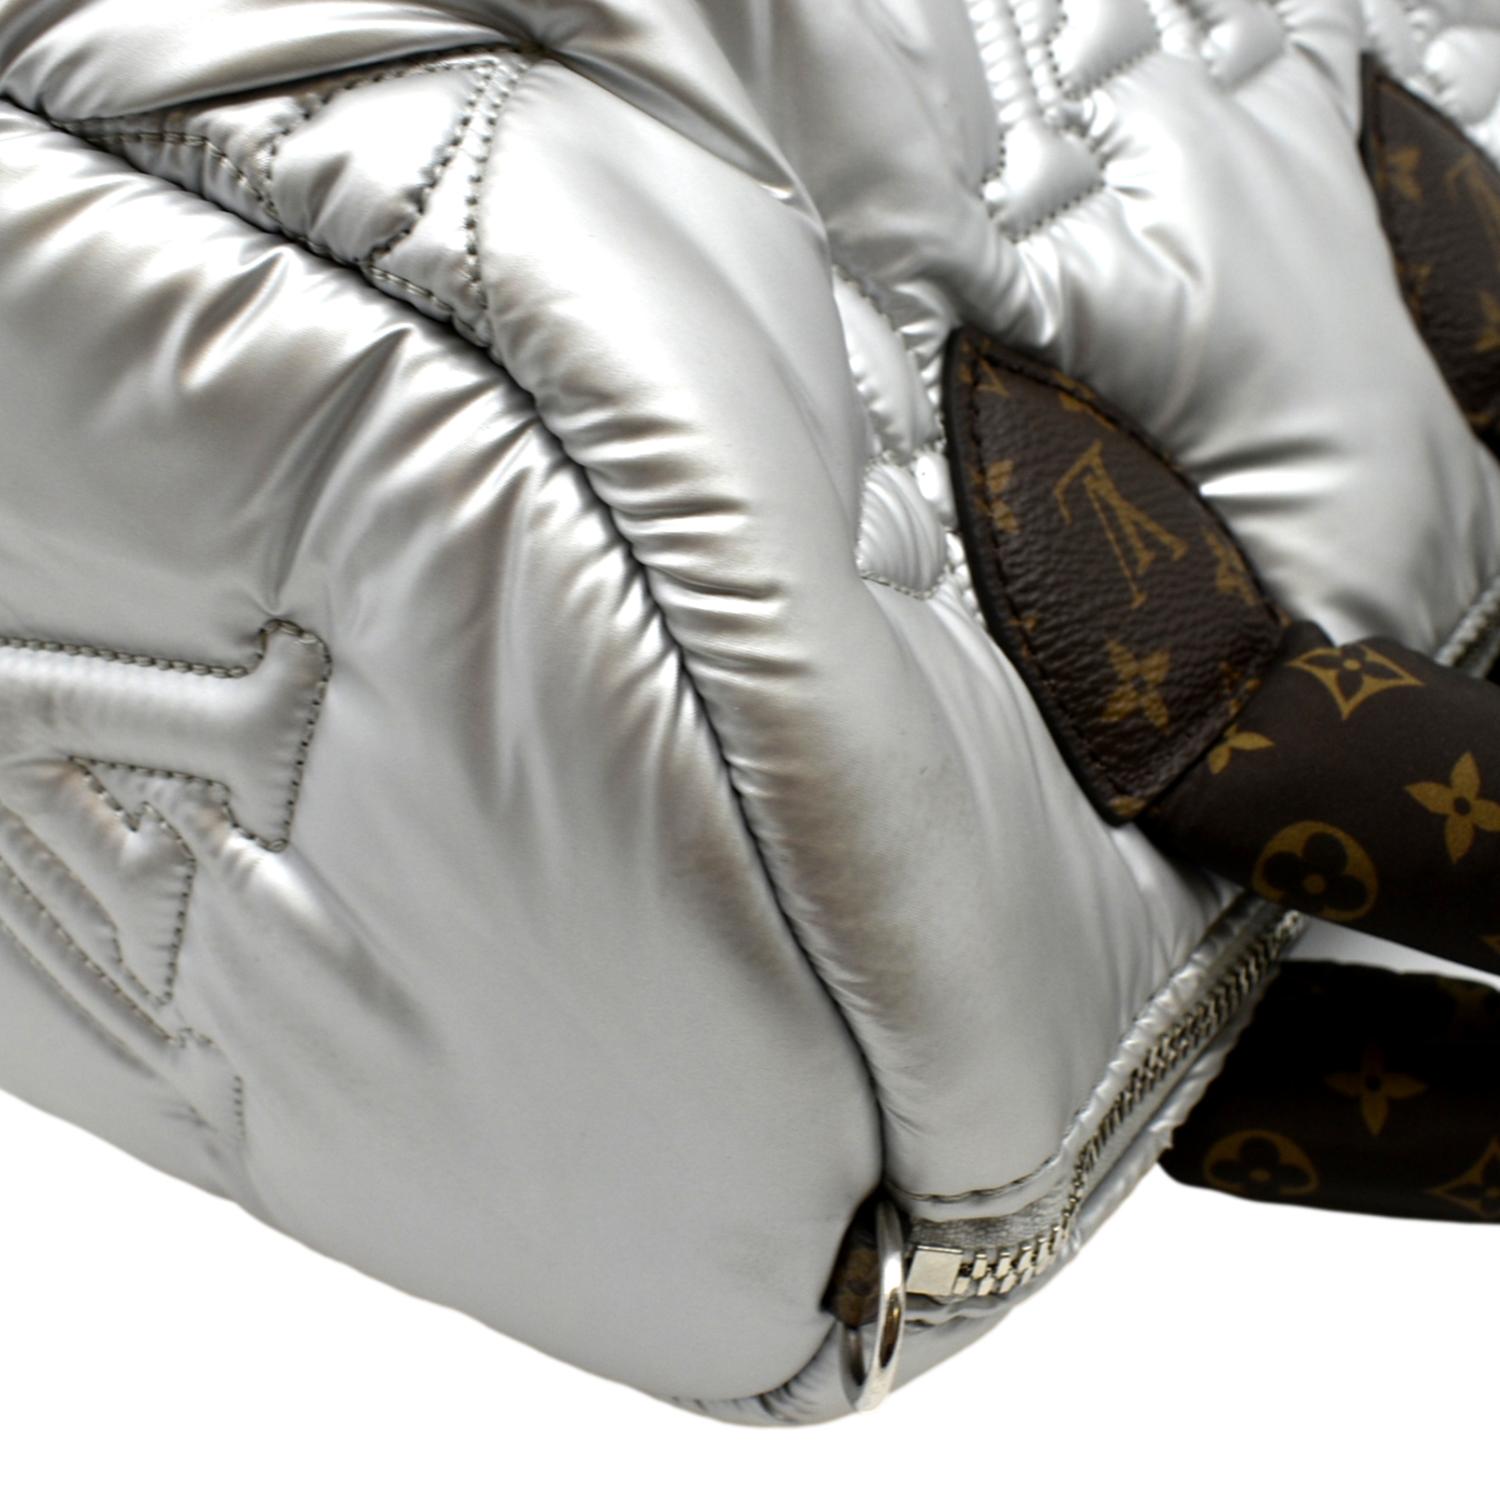 Louis Vuitton Speedy Bandoulière 25 Silver in Econyl Recycled